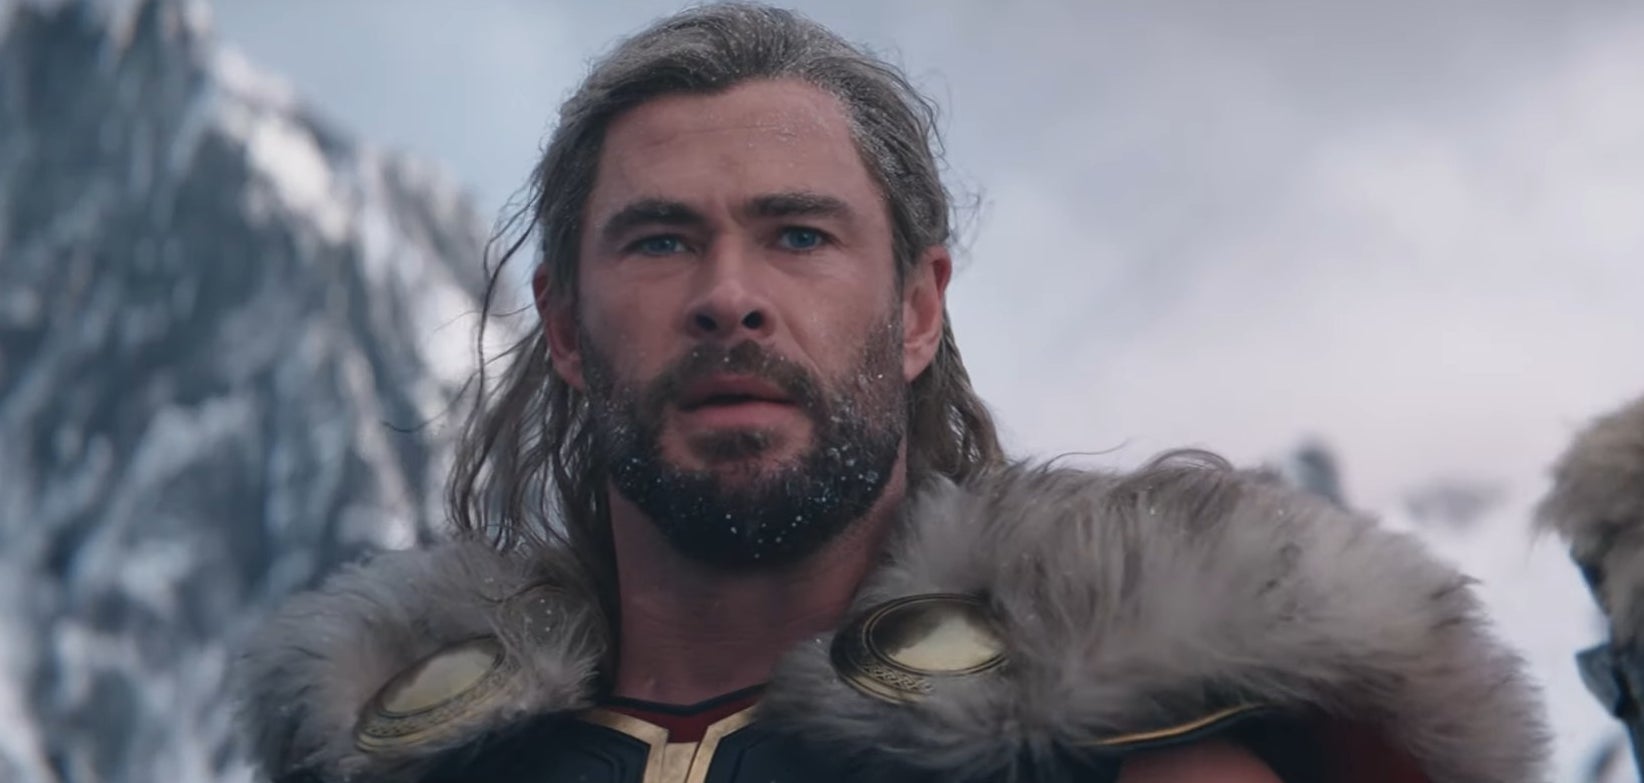 Thor standing on a snowy planet in "Thor: Love and Thunder"